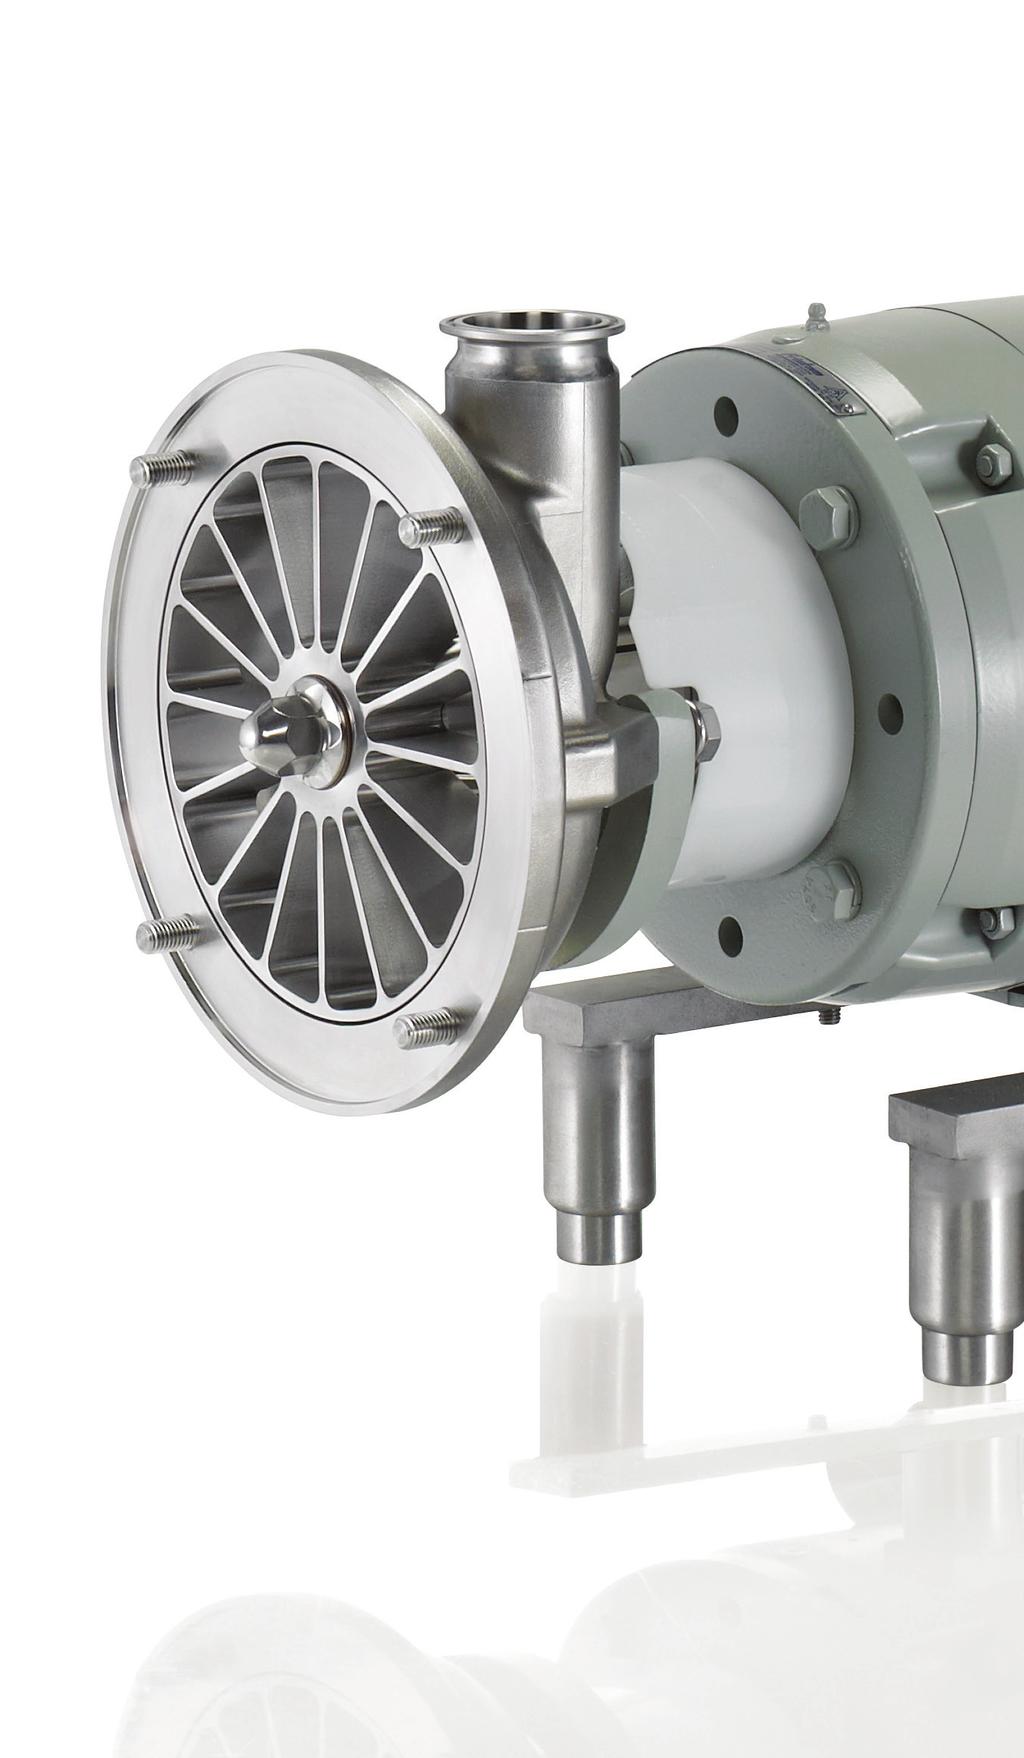 Reduce Product Loss and Ensure Consistent CIP Cycles Fristam s FZX Series sanitary liquid-ring pumps provide new capabilities for handling products with entrained air.